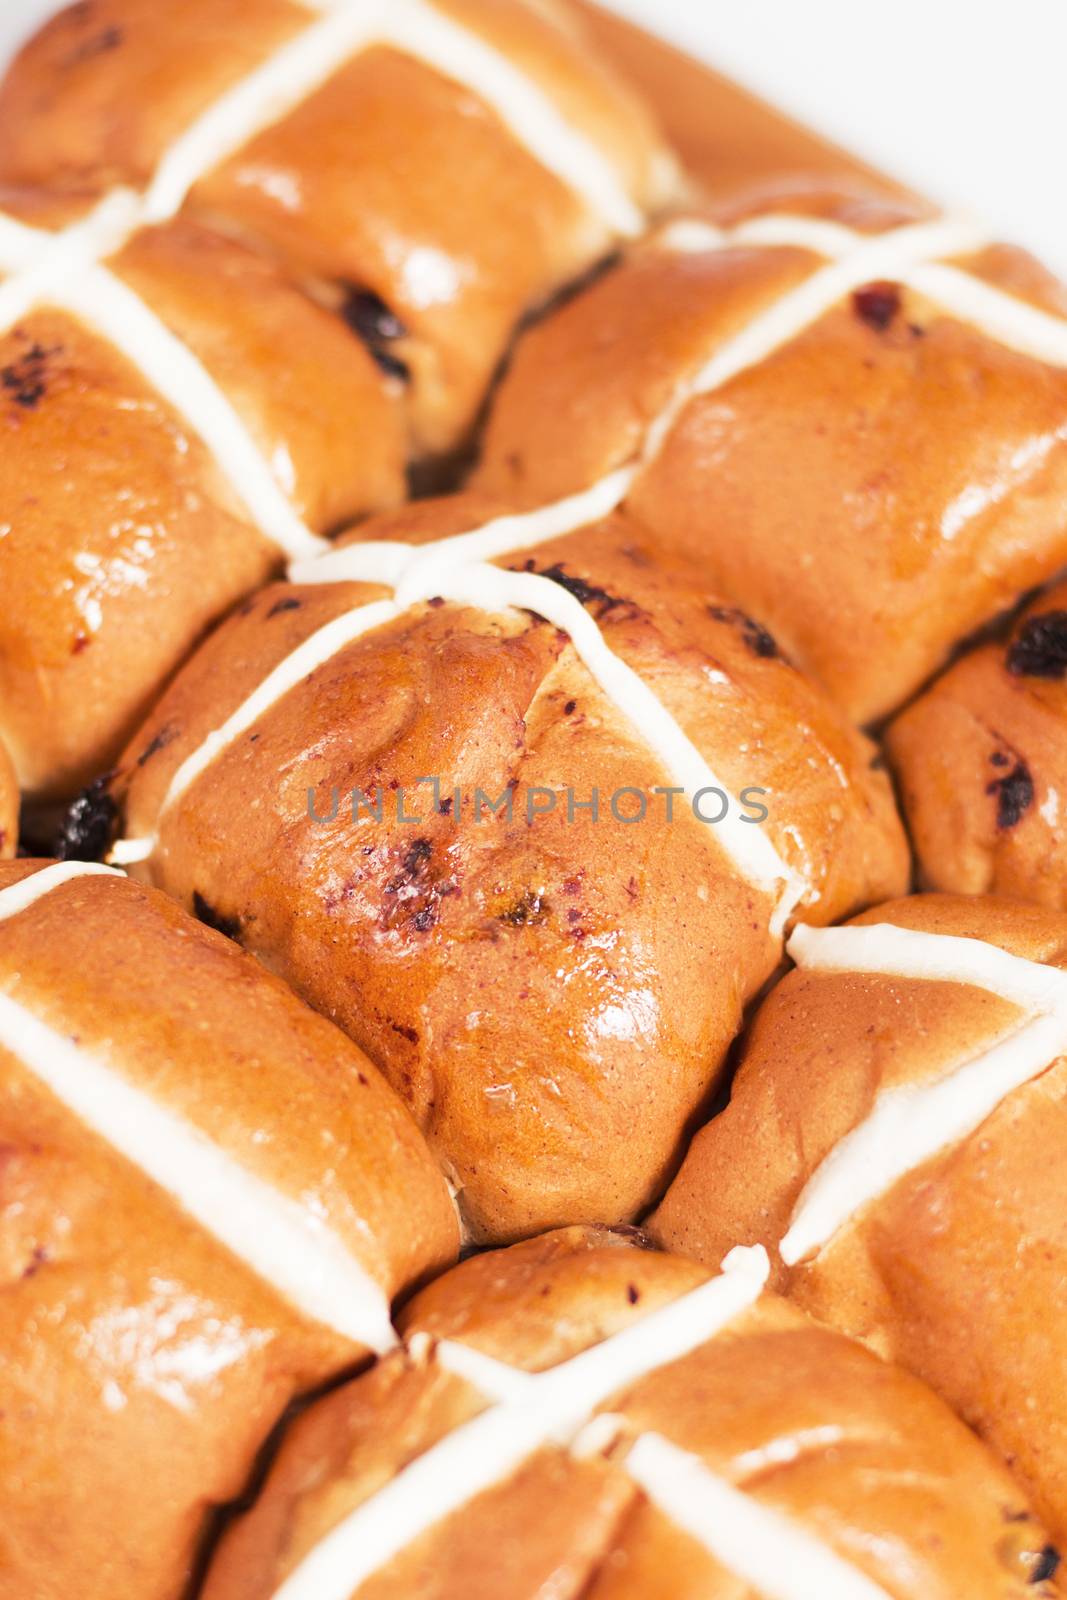 Hot cross buns on a timber board with a white background.